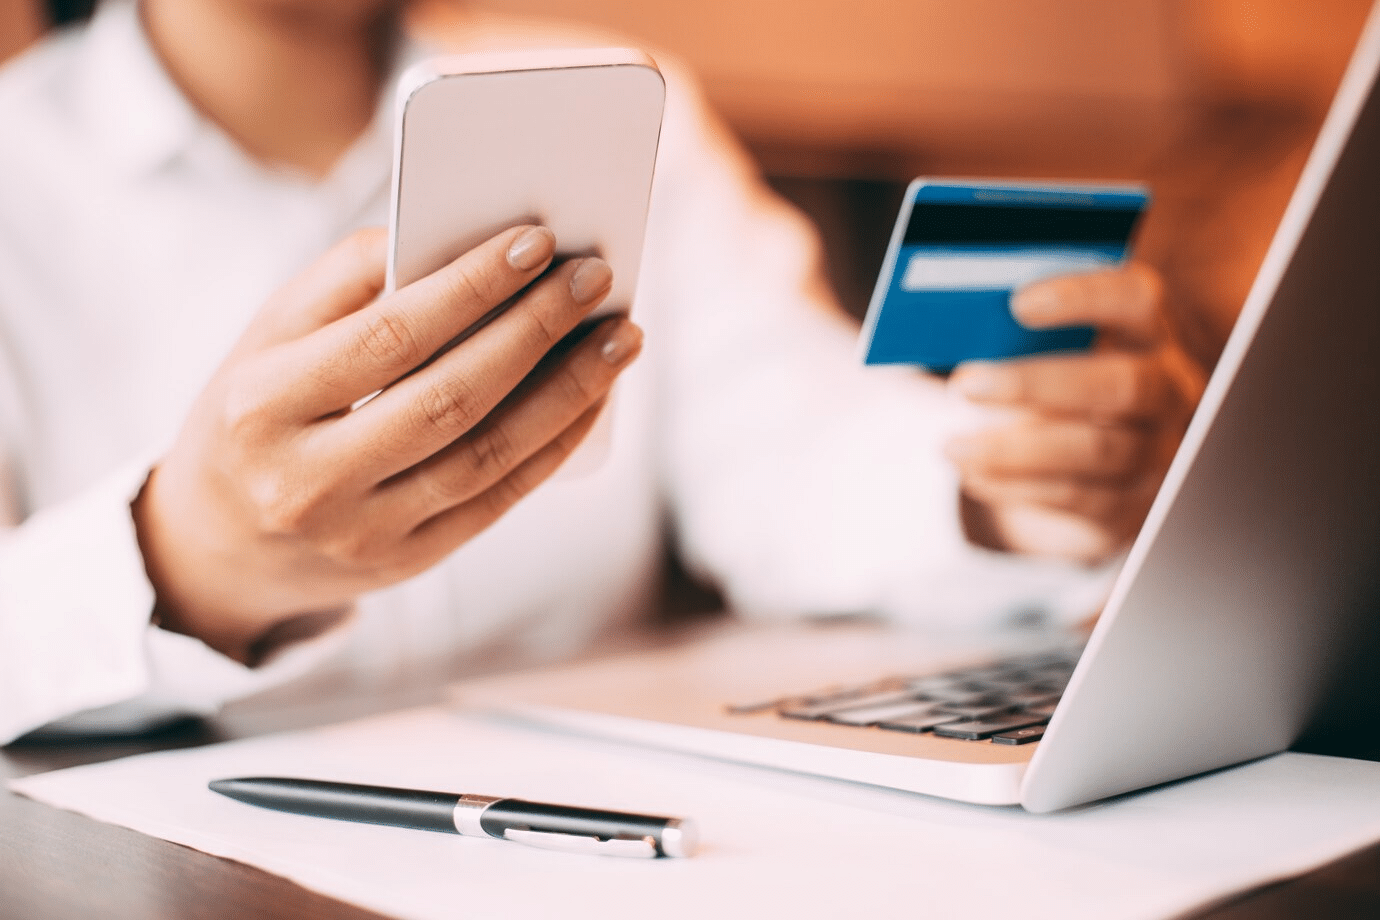 Common Threats to Online Transactions